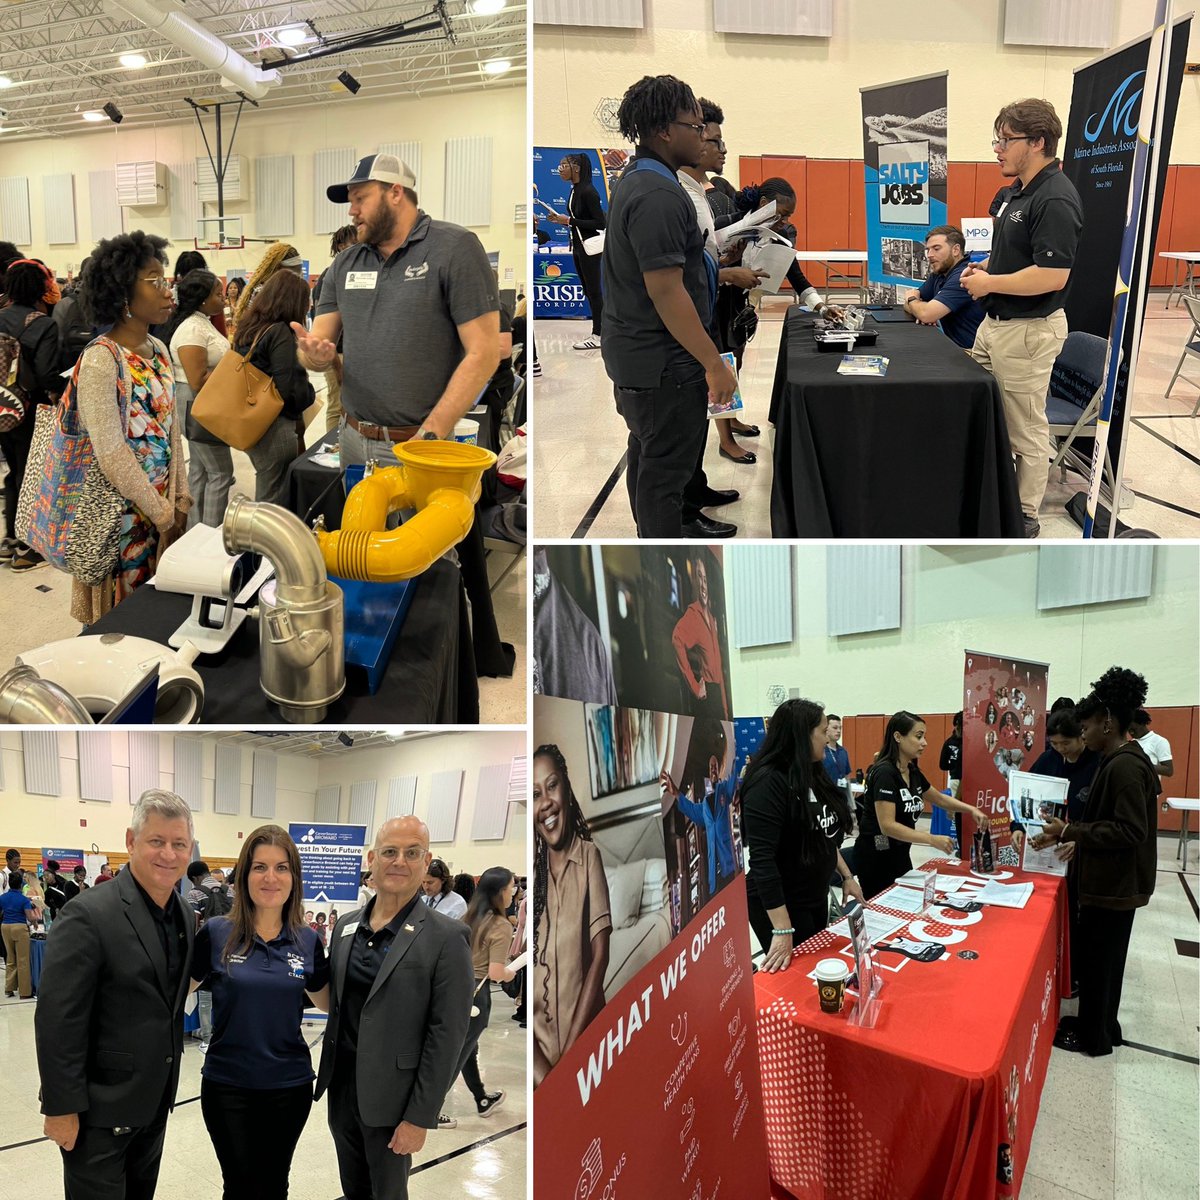 Many “Next Moves” were made today! My Next Move encouraged high school seniors to explore career pathways by interacting with local agencies & businesses. Thanks to our partnership with the @GFLAlliance, students, motivational speakers & explore job & internship opportunities!